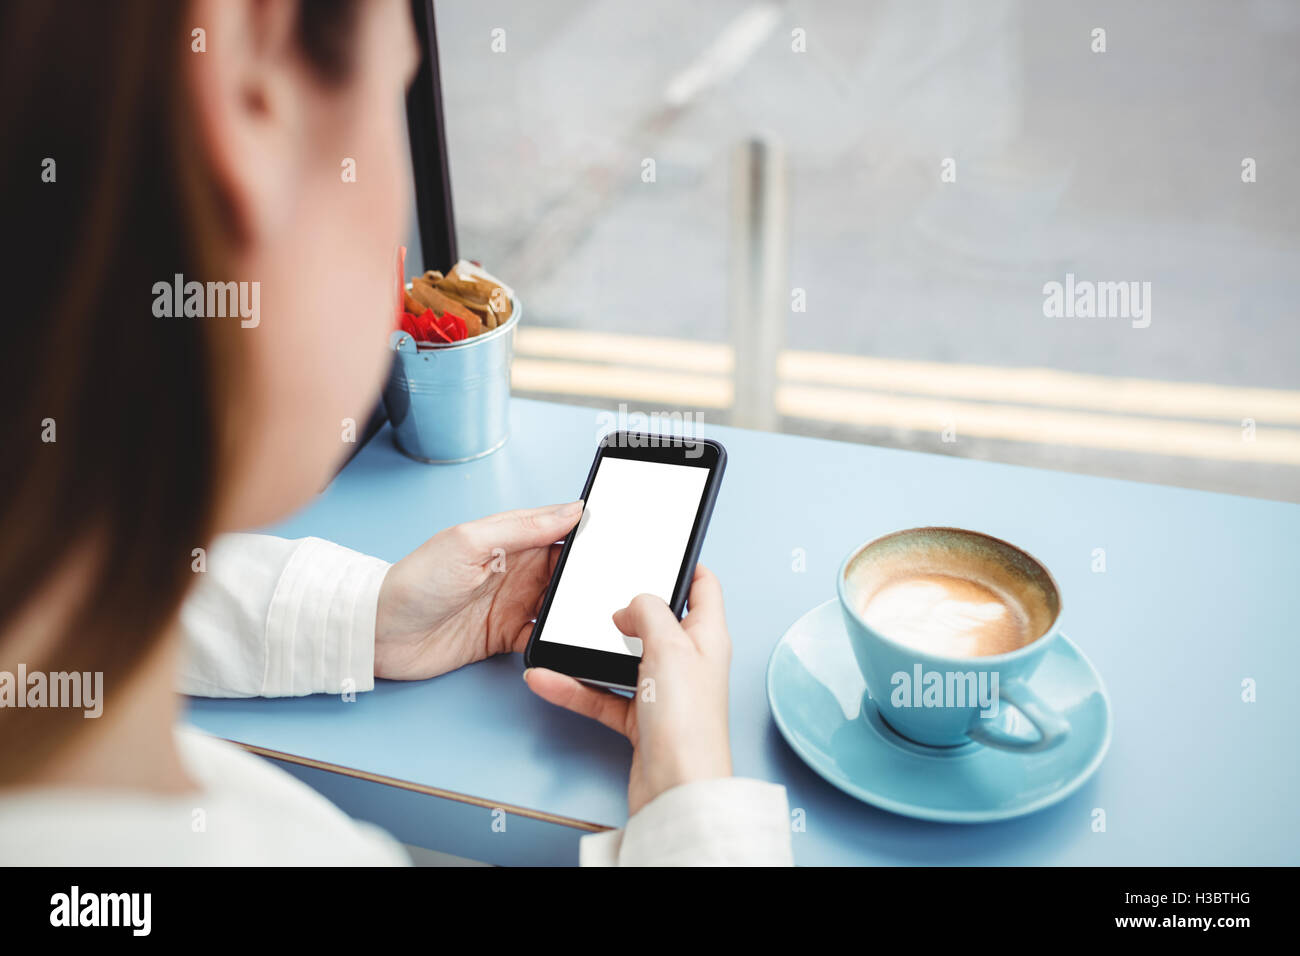 Woman text messaging on mobile phone Stock Photo